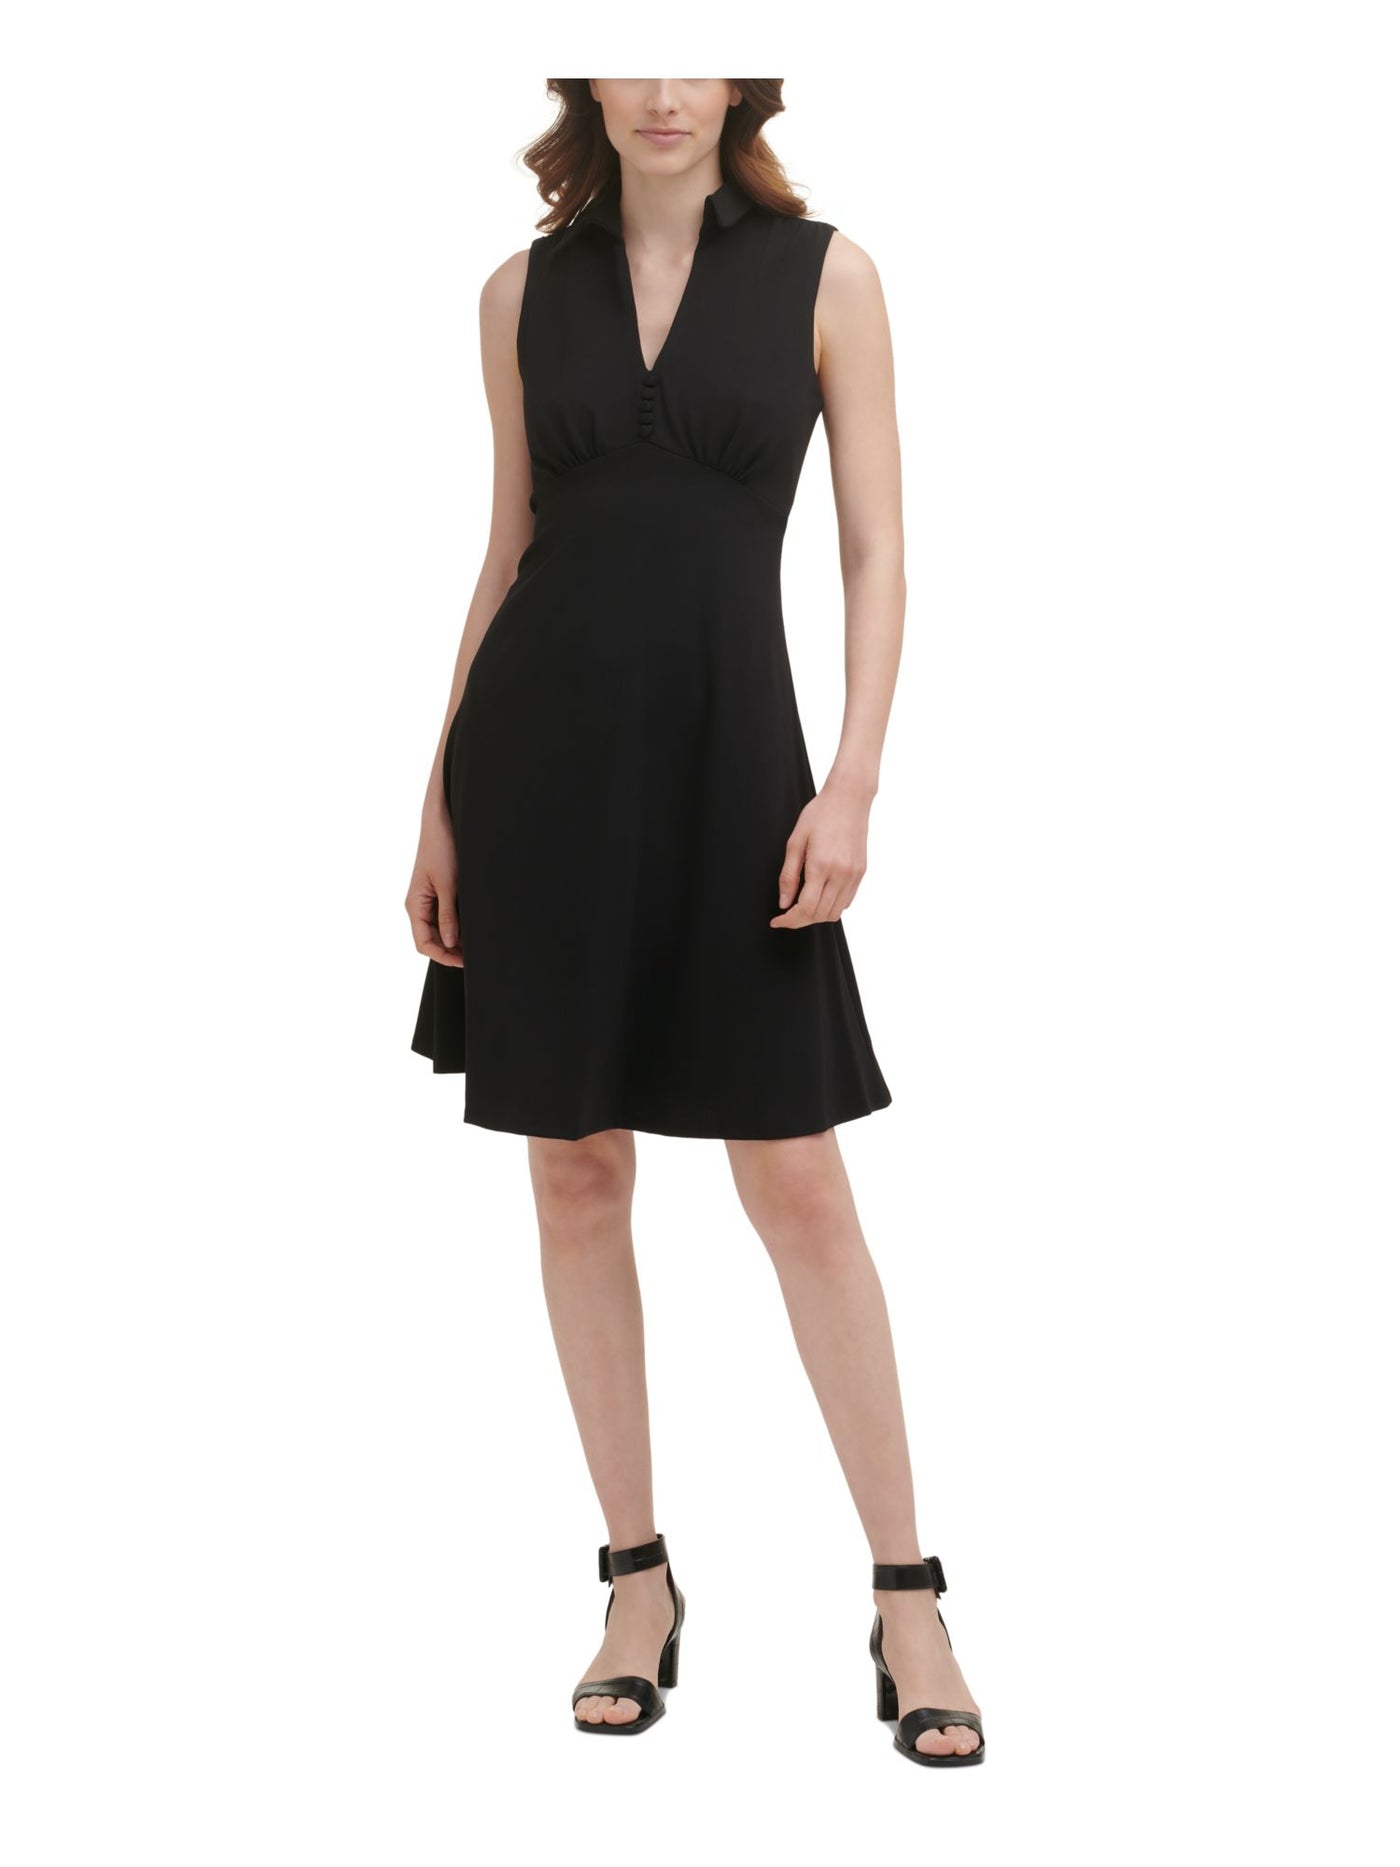 CALVIN KLEIN Womens Black Stretch Zippered Ruched Collared V-neck Button Detail Sleeveless Above The Knee Wear To Work Fit + Flare Dress 6